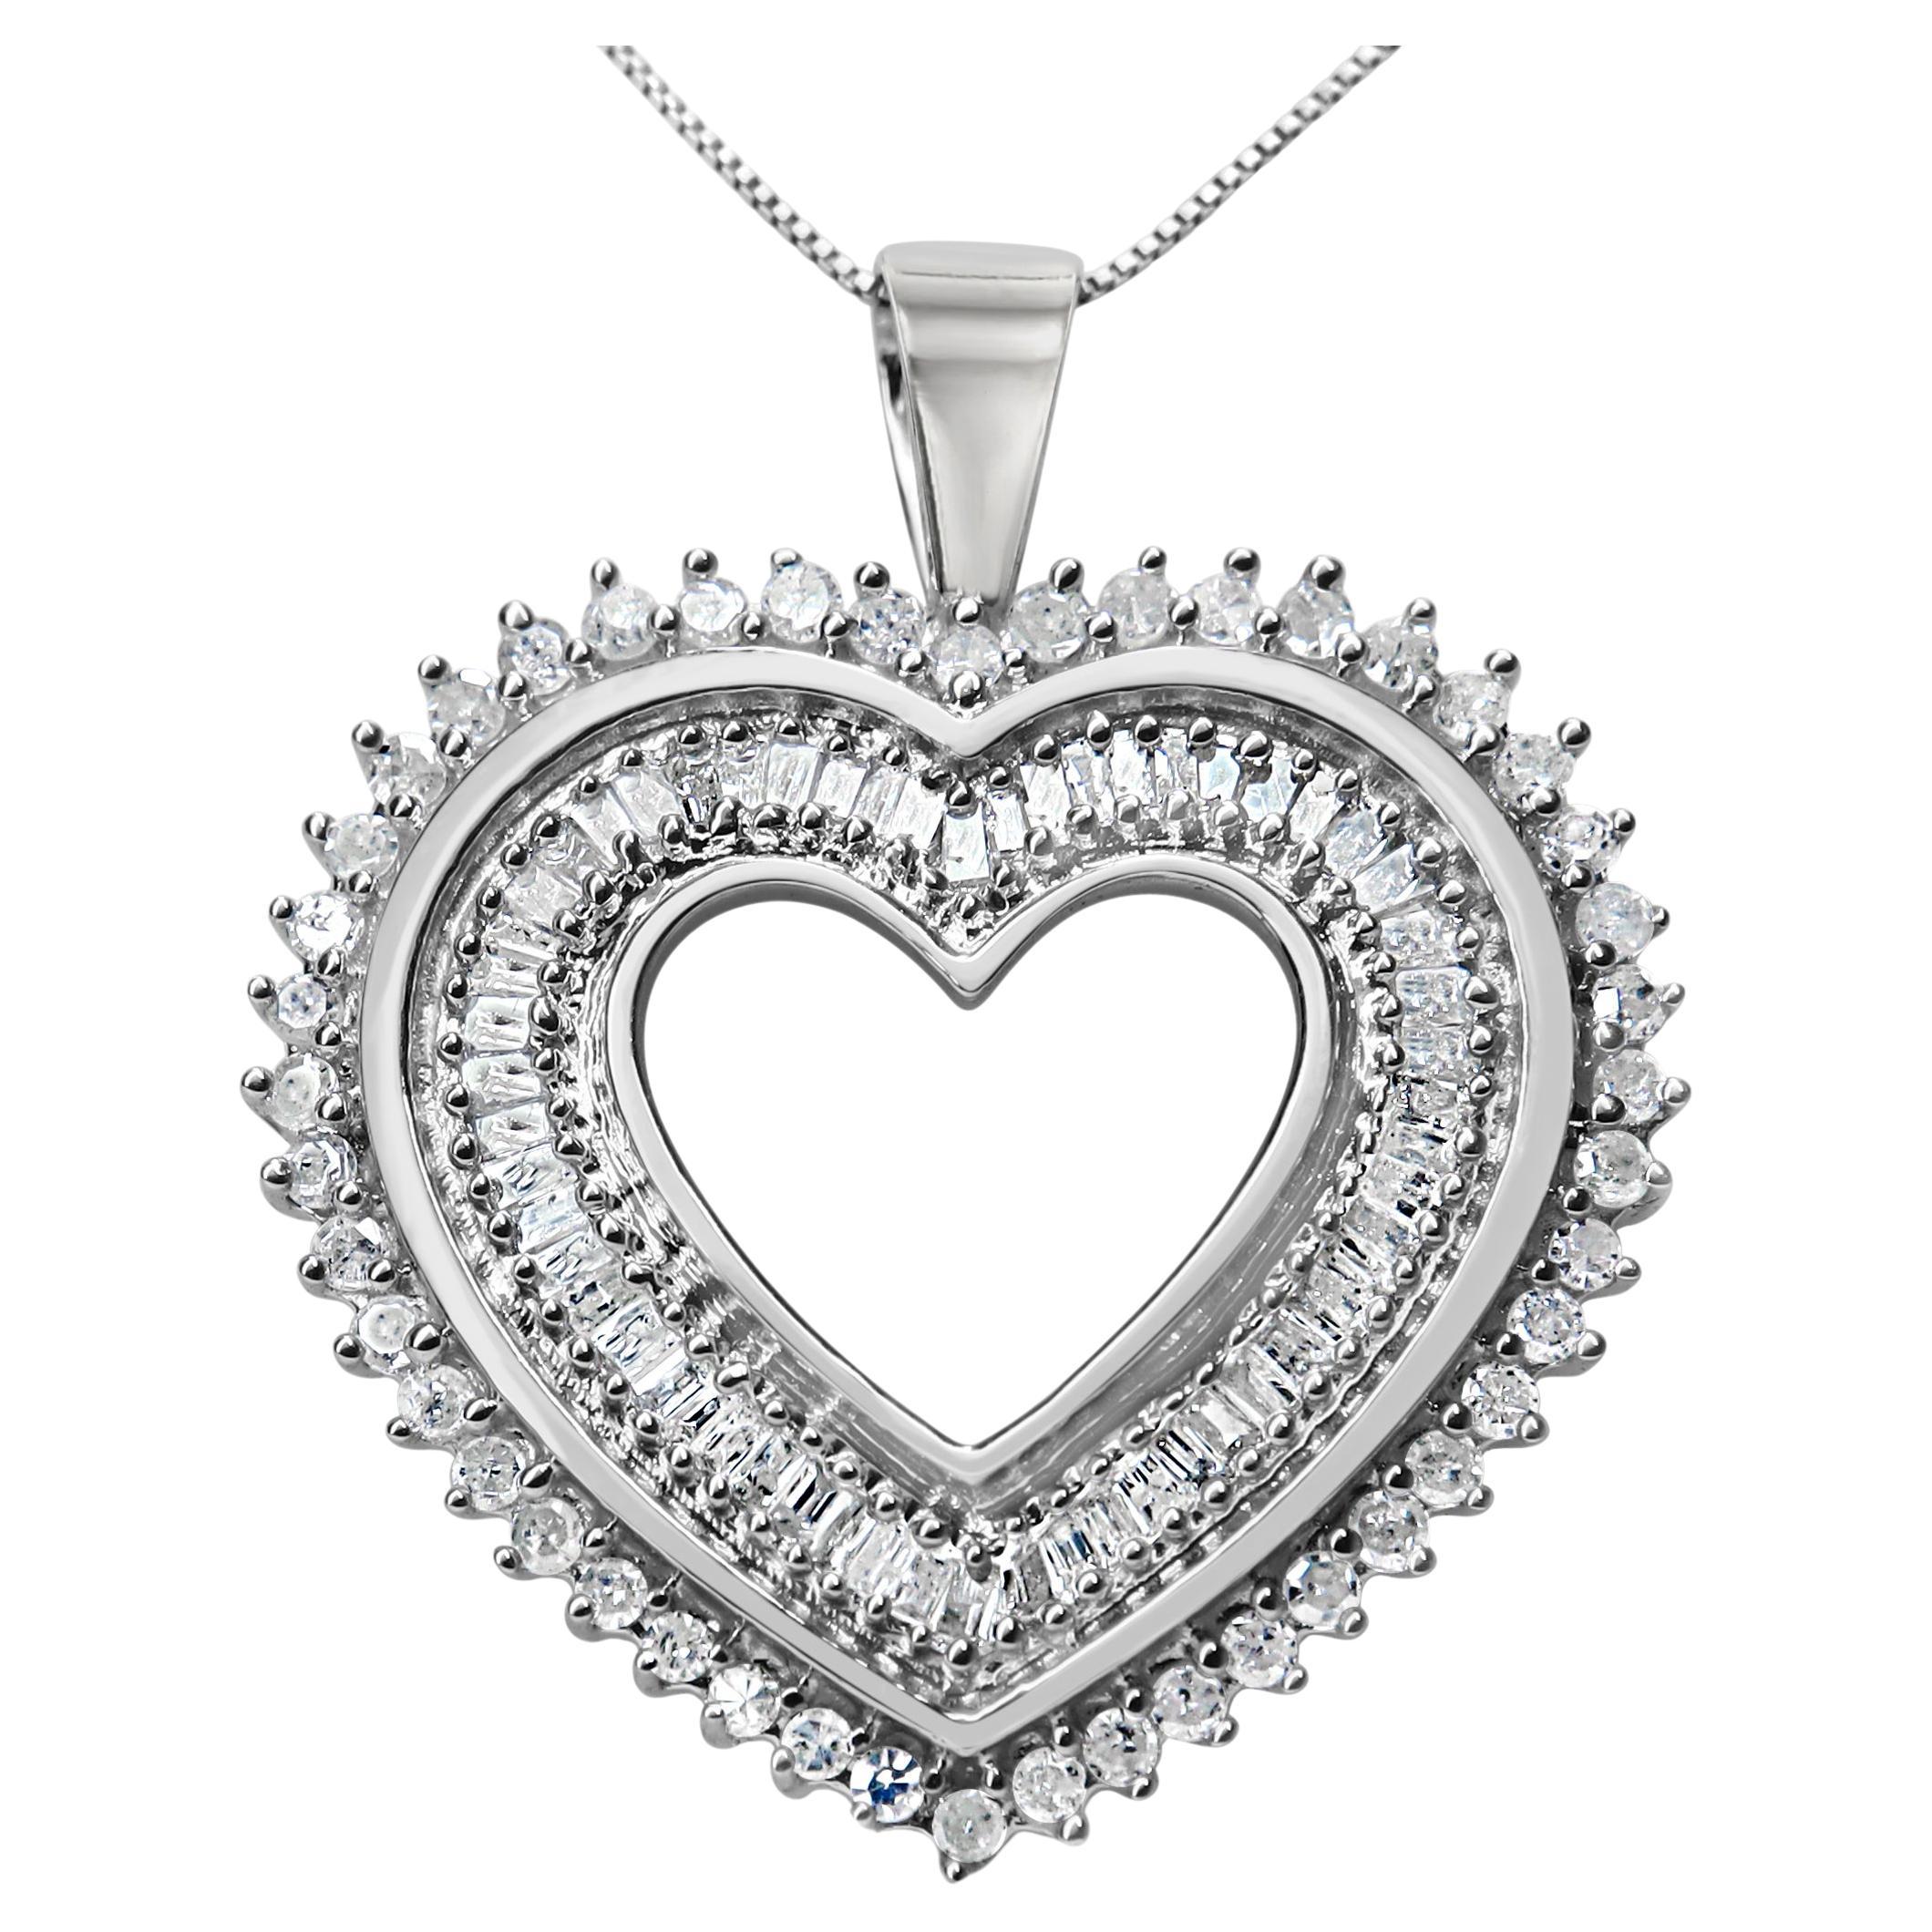 .925 Sterling Silver 1.0 Carat Baguette and Round Diamond Heart Pendant Necklace